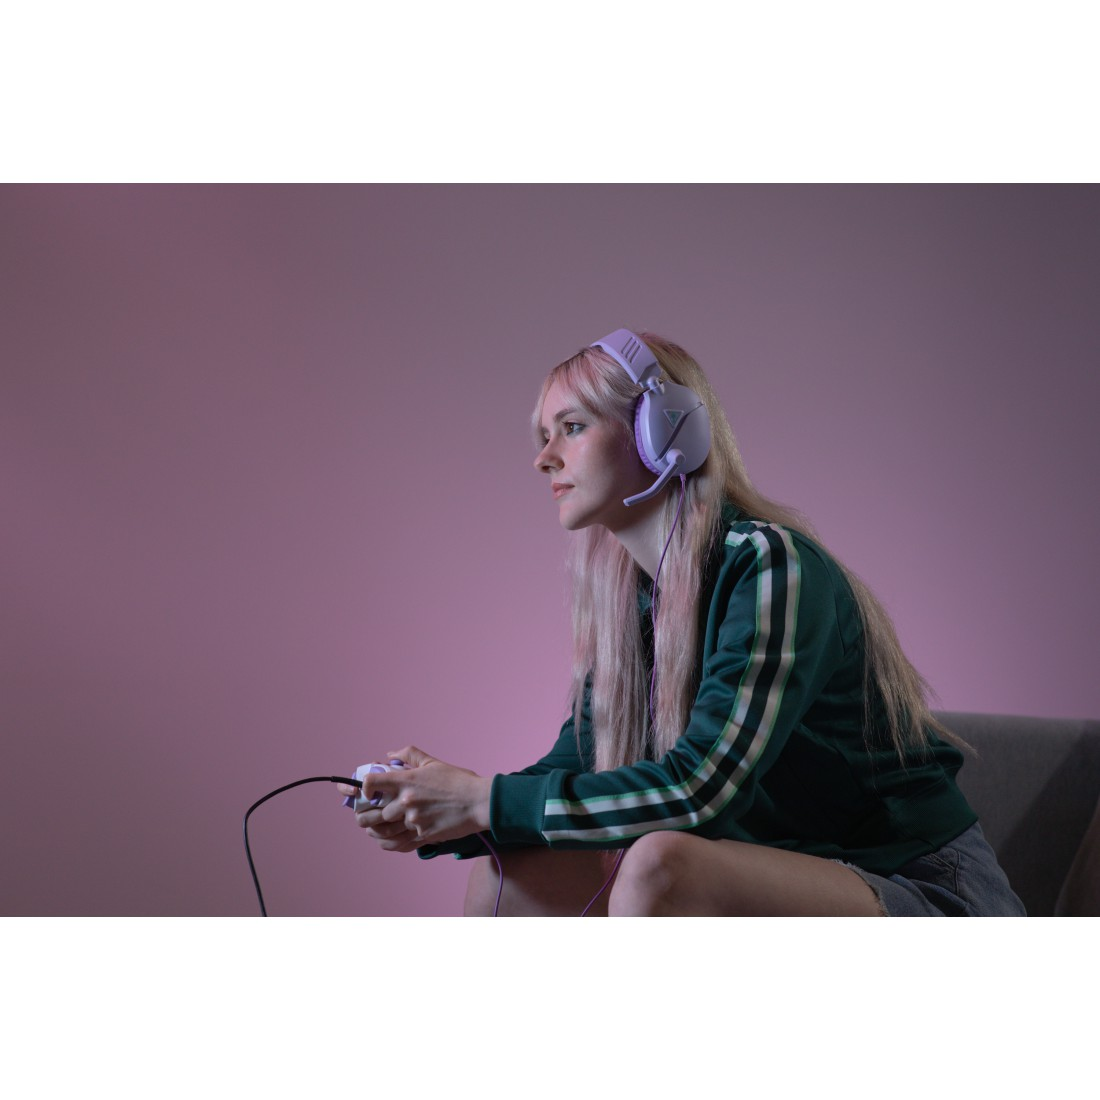 Headset Recon Over-ear 70, TBS-6560-05 Lila Over-Ear TURTLE Gaming BEACH